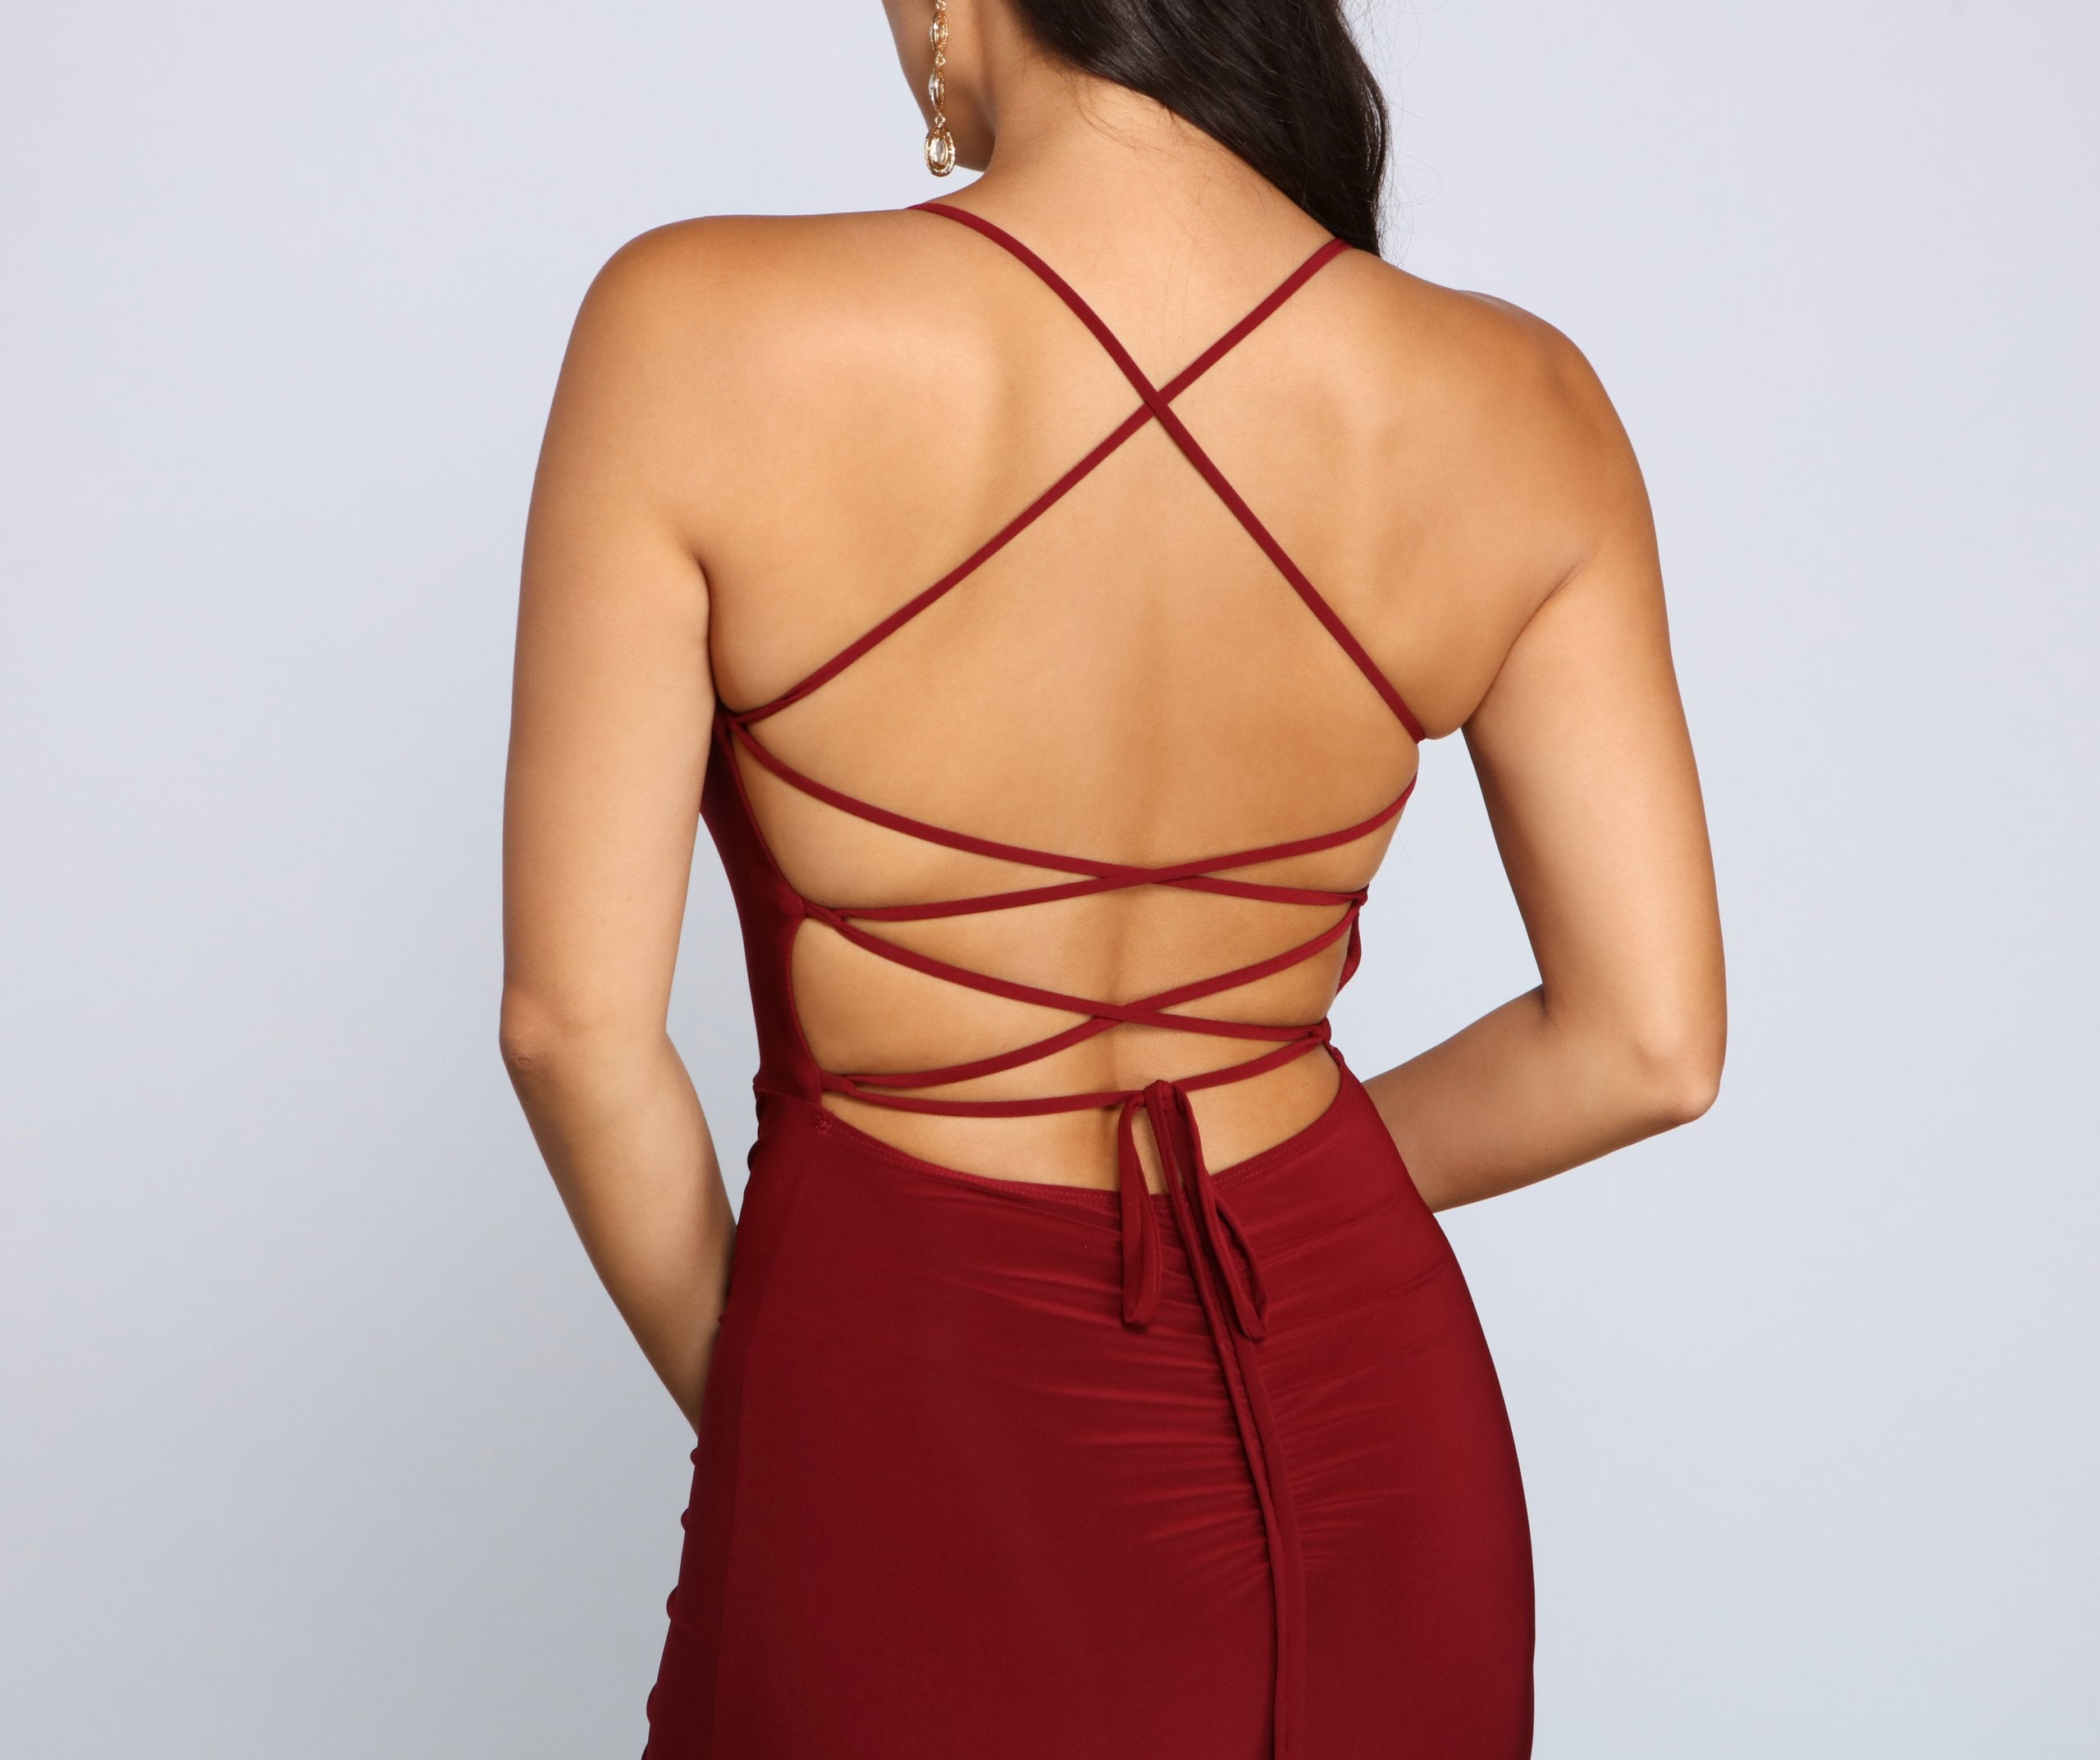 Gia Lace-Up Formal High-Slit Dress - Lady Occasions